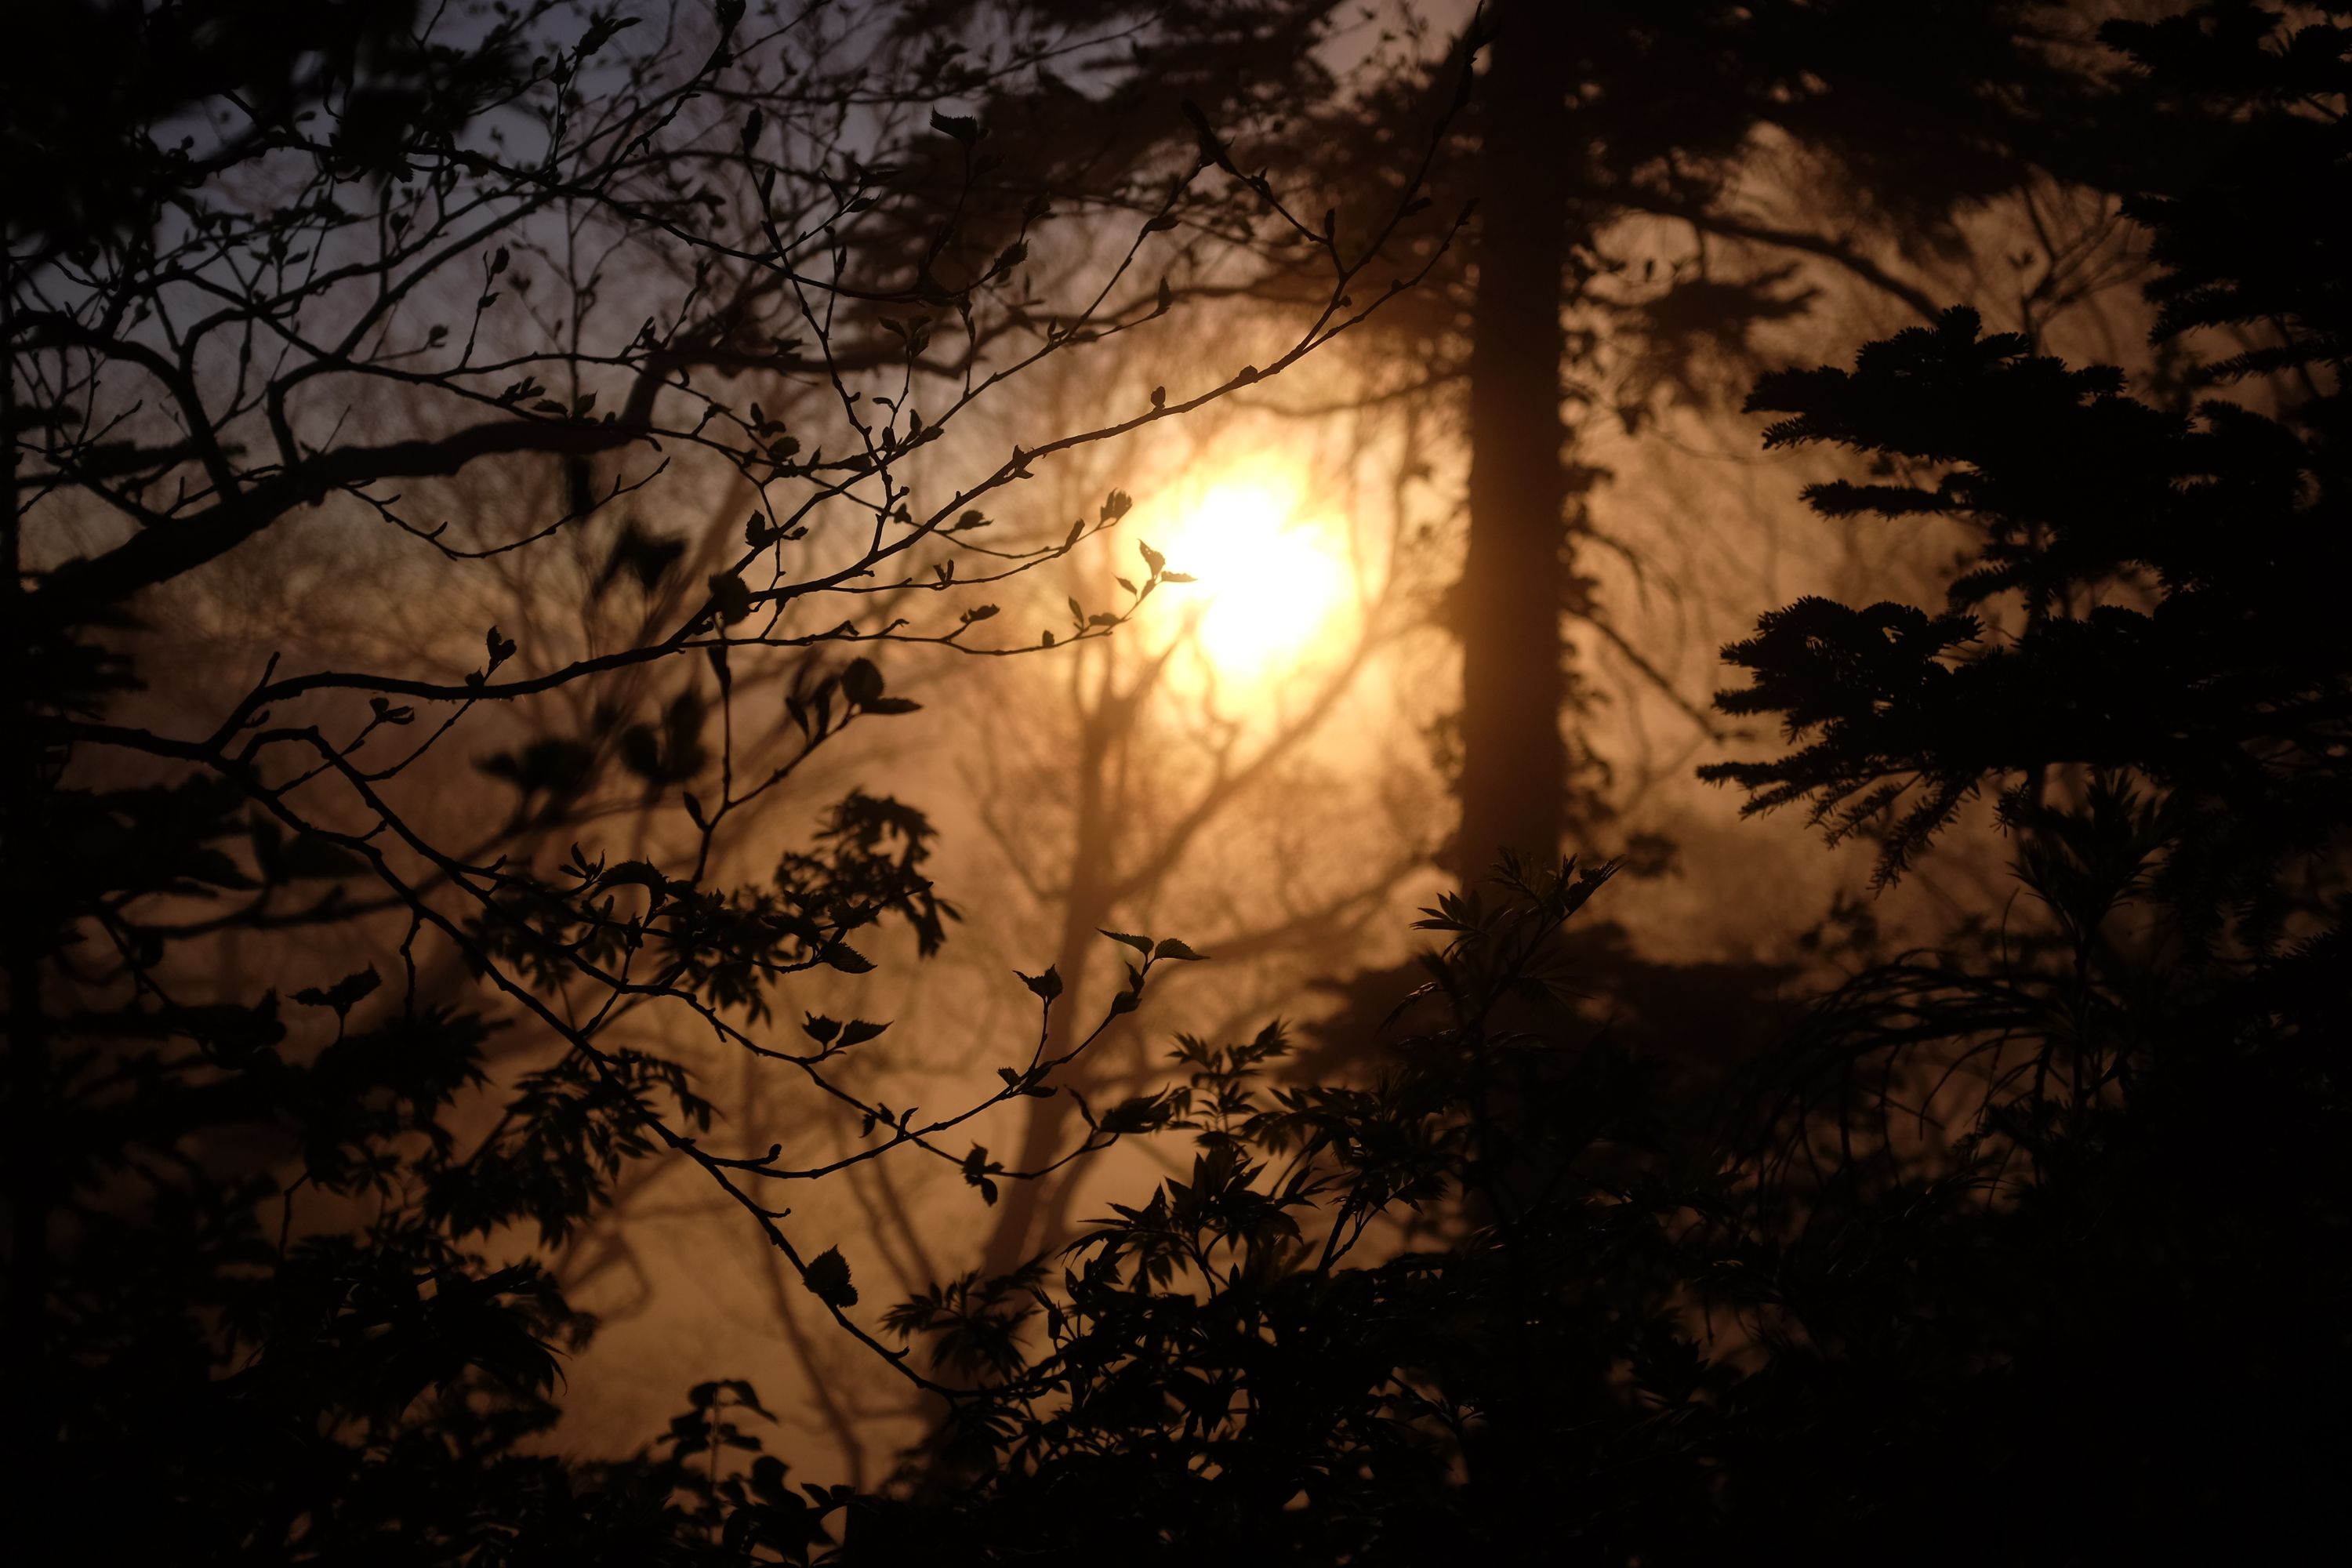 The setting sun viewed through a thick forest.